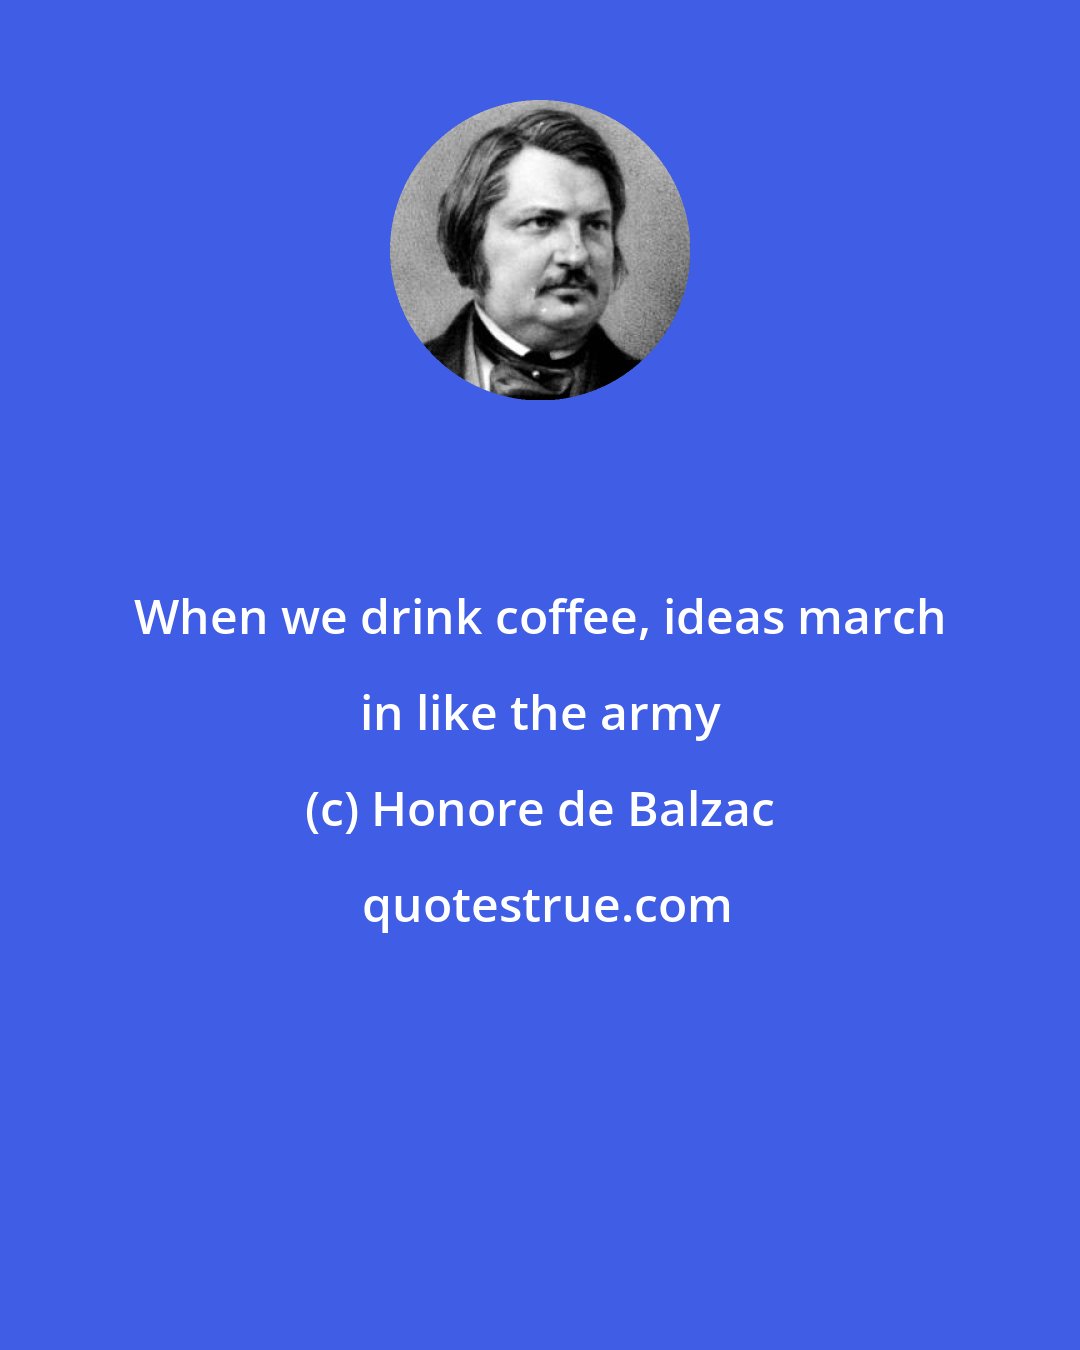 Honore de Balzac: When we drink coffee, ideas march in like the army